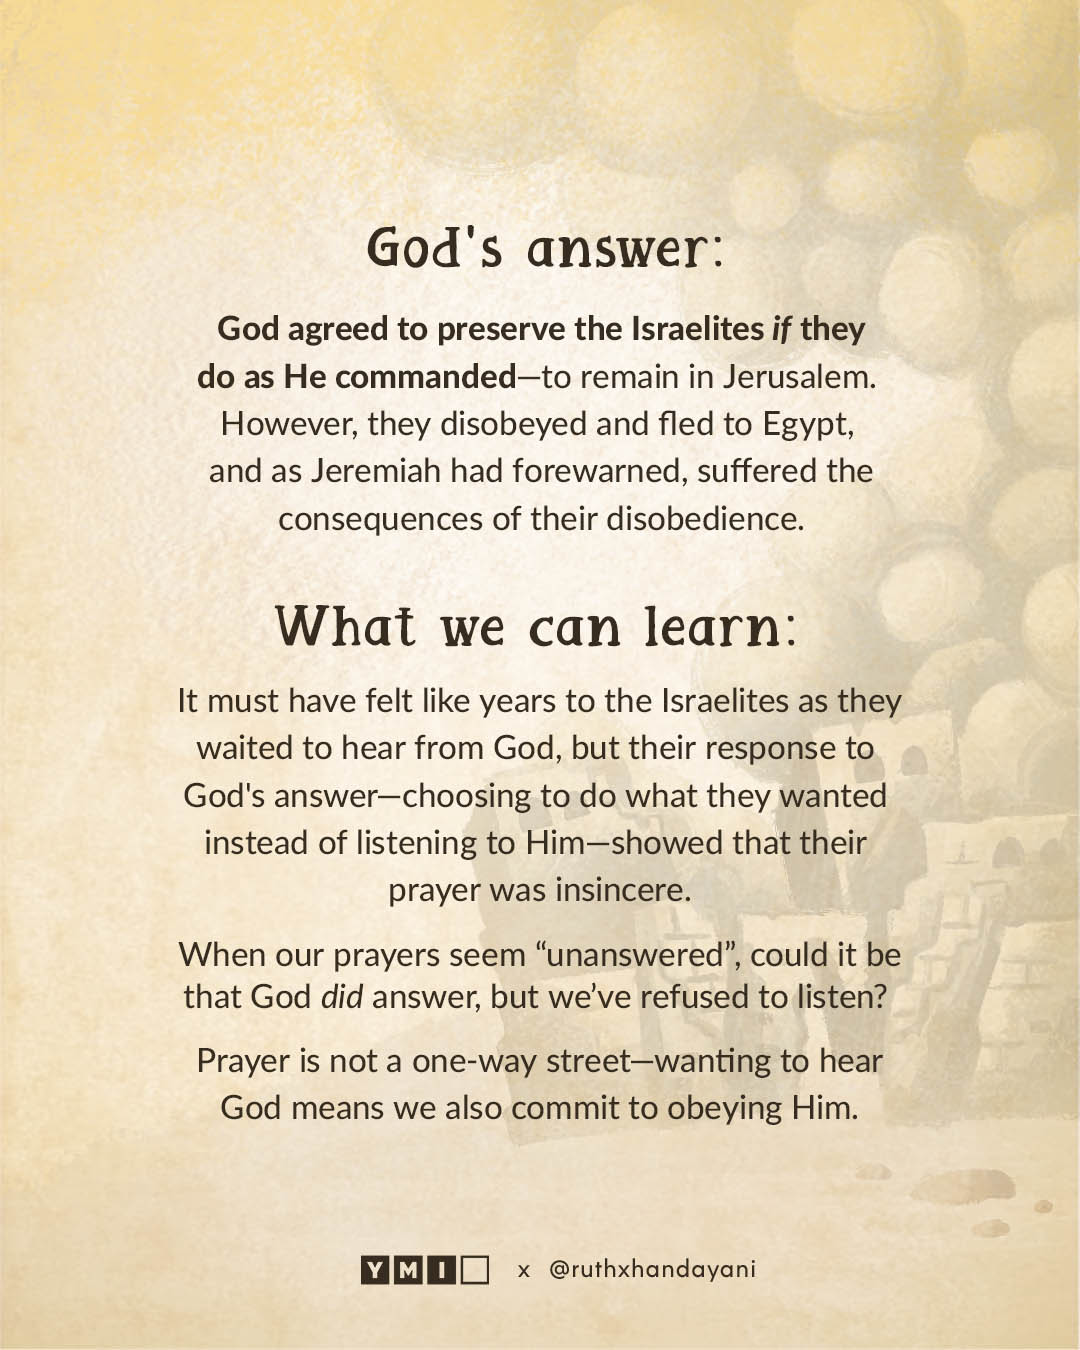 What we can learn from Jeremiah's prayer